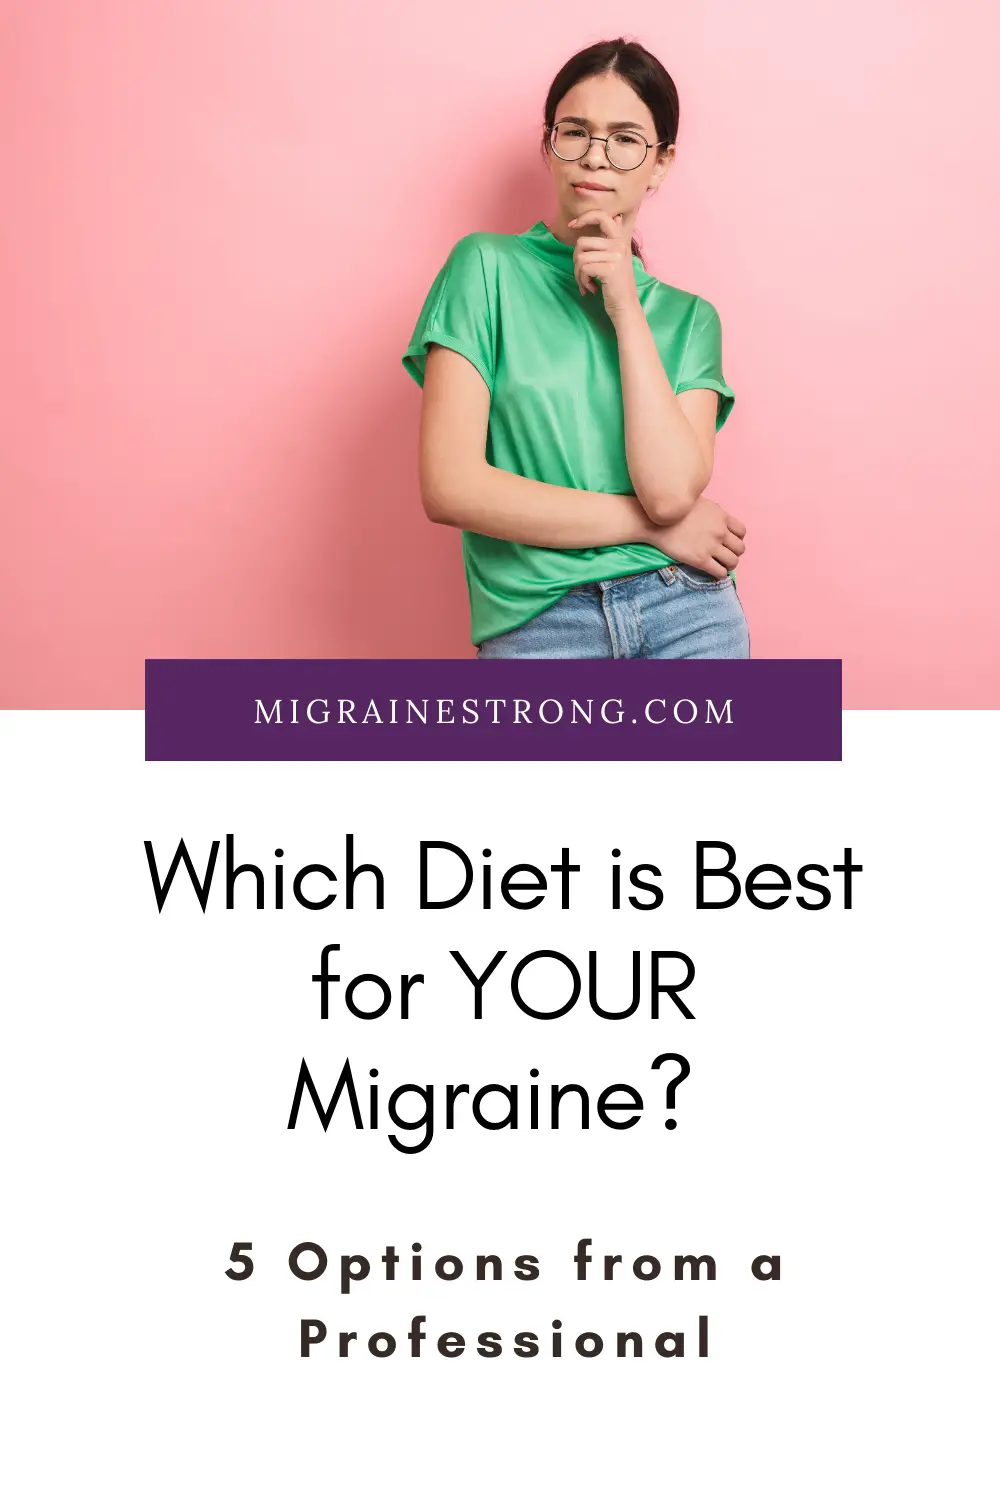 What’s the Best Diet for YOUR Migraine?